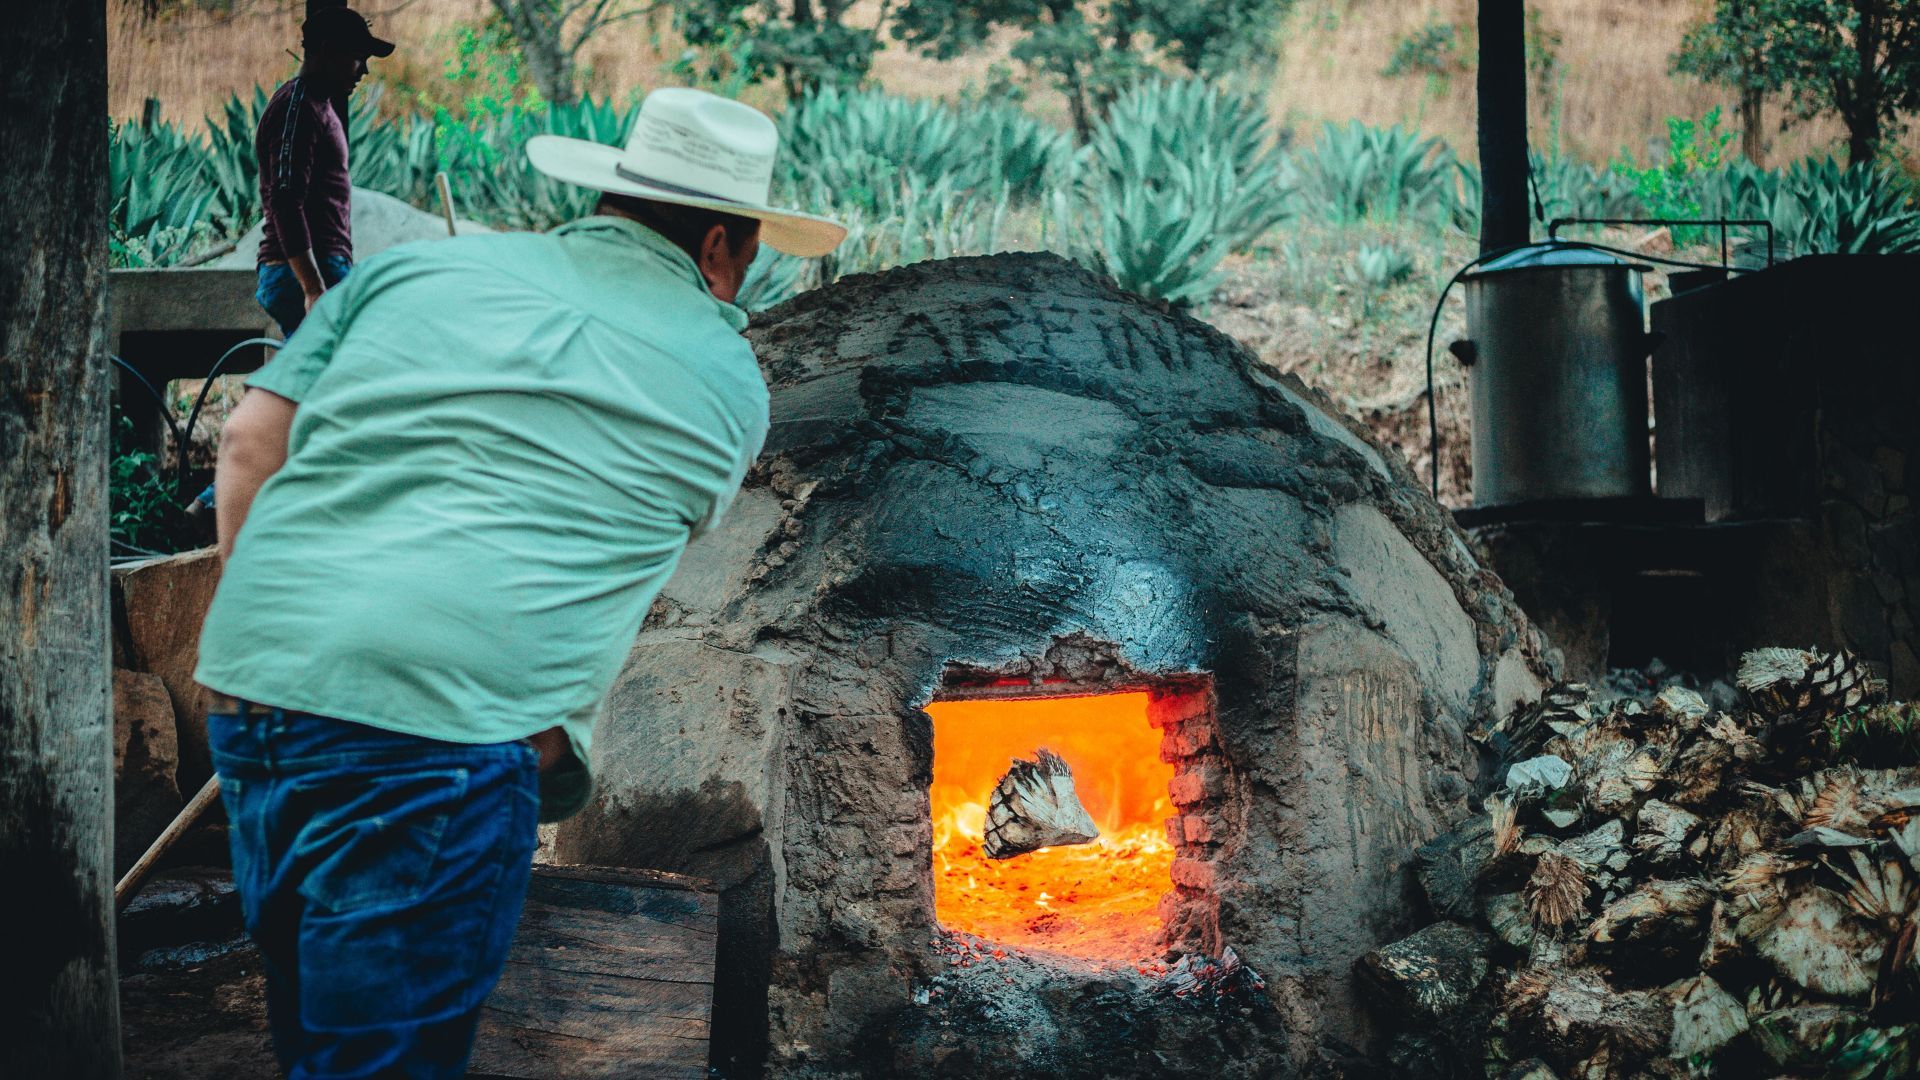 Cooking process of tequila and mezcal